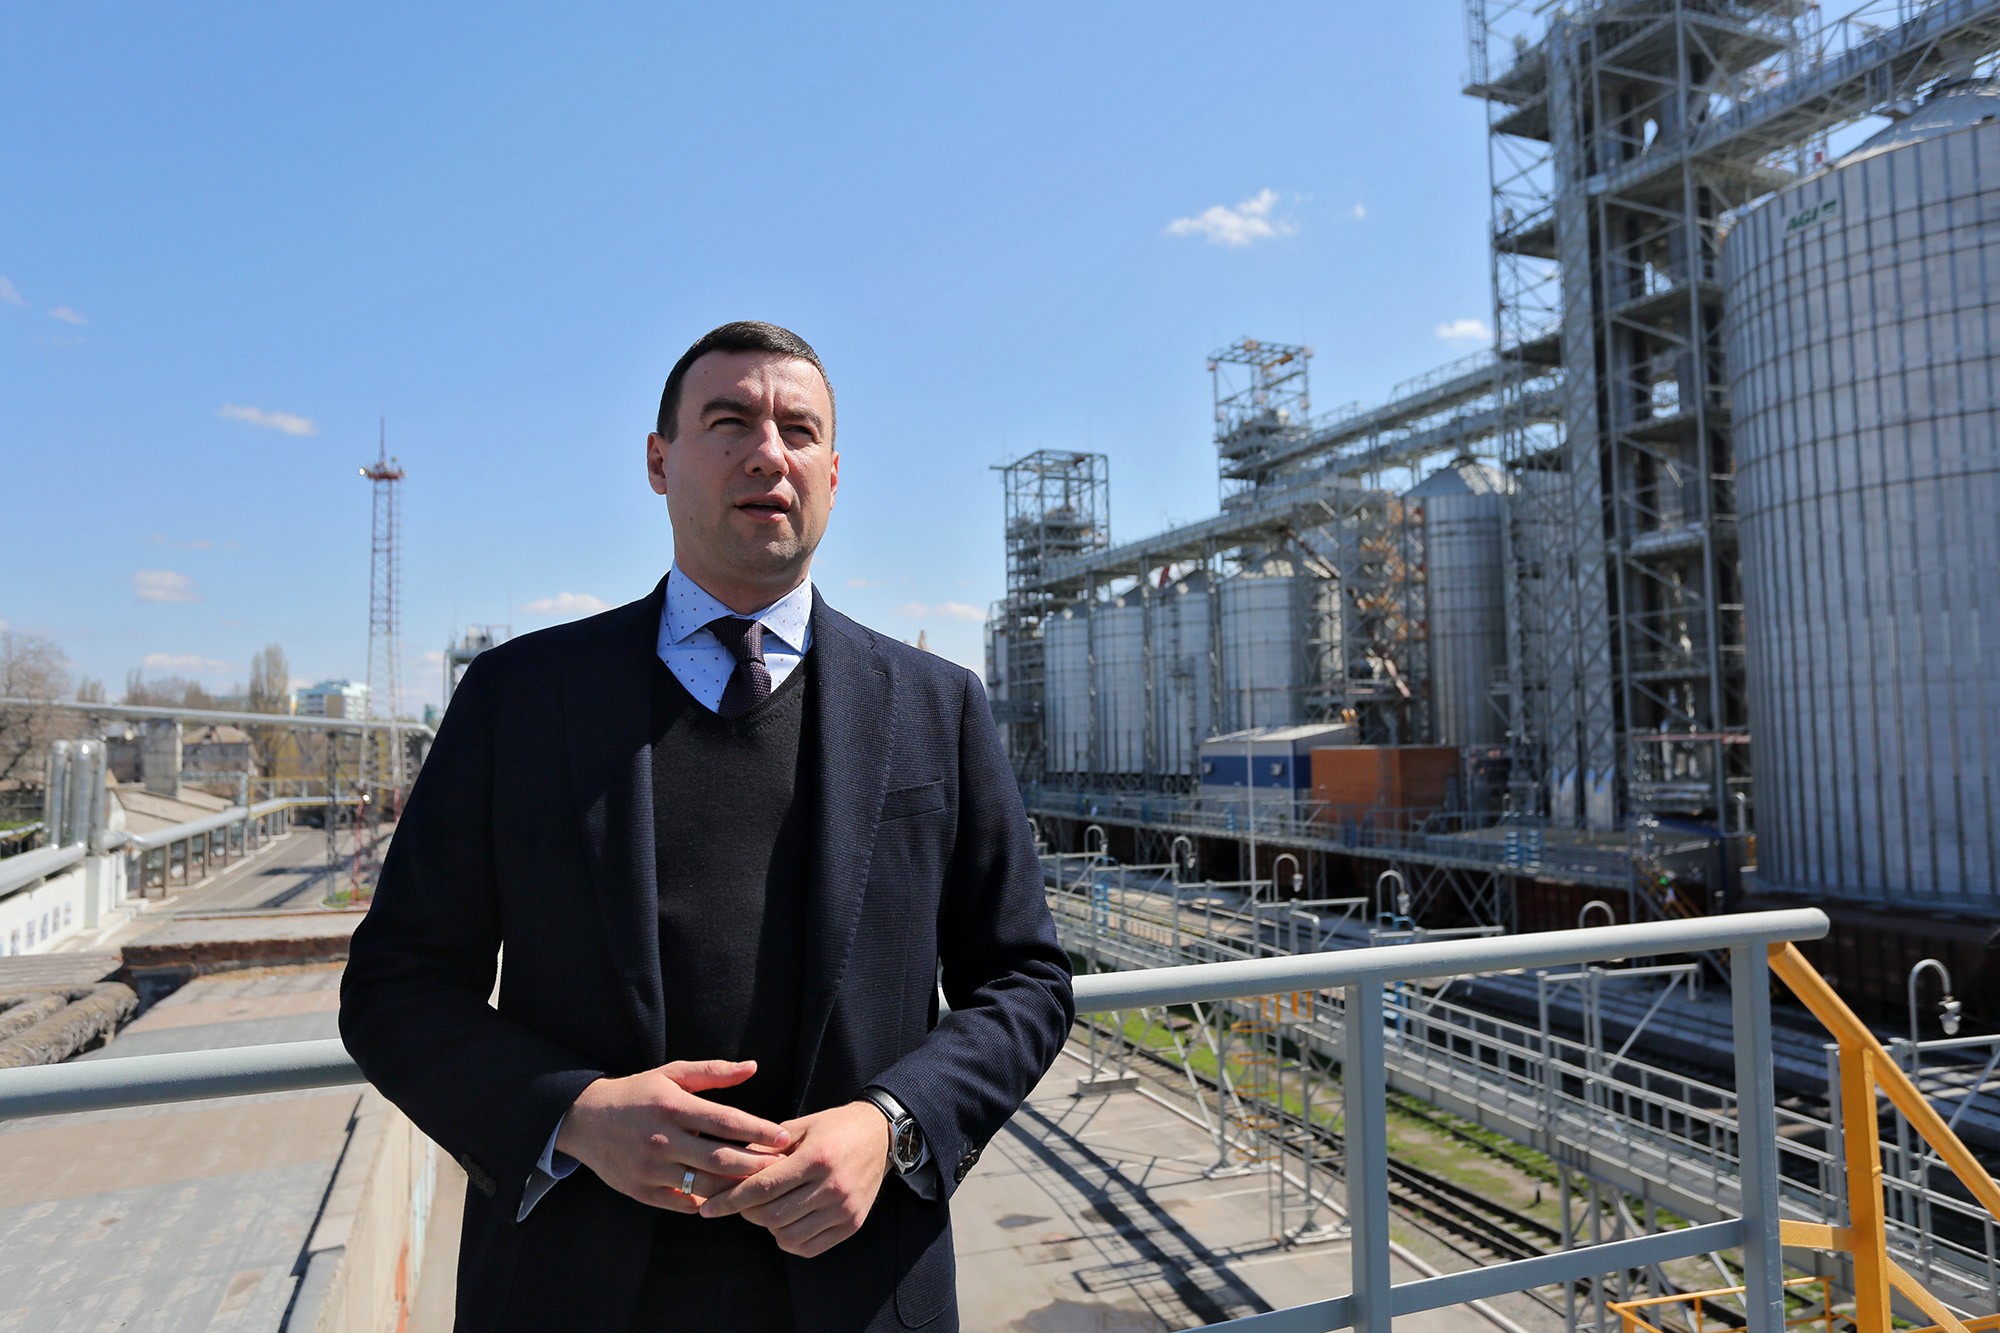 Andrii Dmytrenko, the director of the Ukrainian Builder construction company, or Ukrbud for short, speaks to Kyiv Post at the sea port of Mykolaiv.